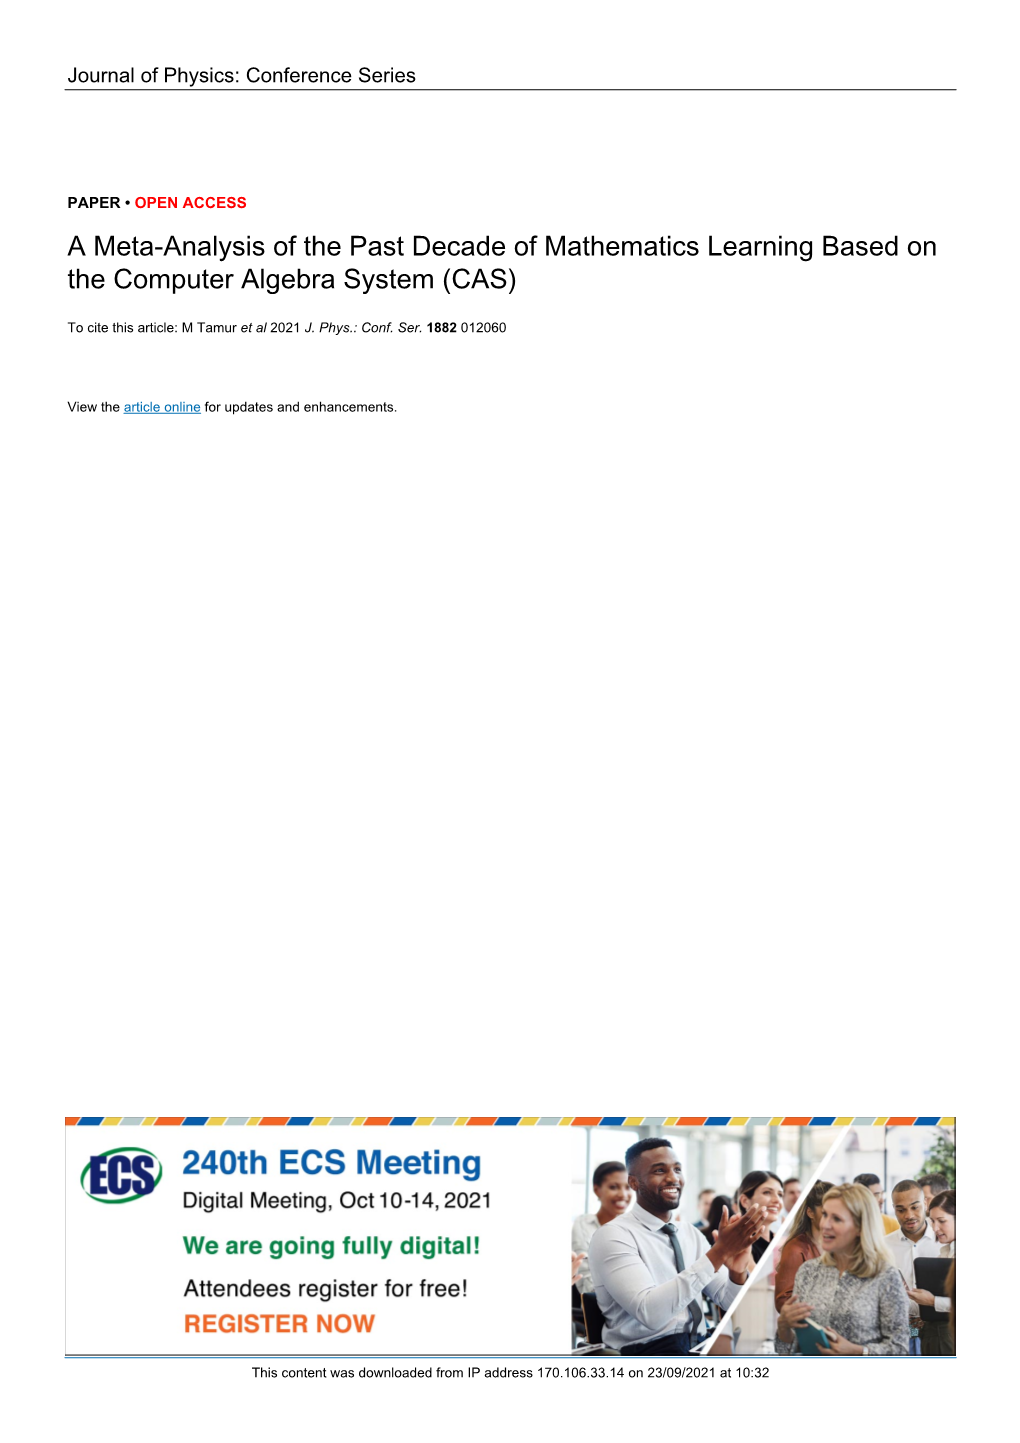 A Meta-Analysis of the Past Decade of Mathematics Learning Based on the Computer Algebra System (CAS)